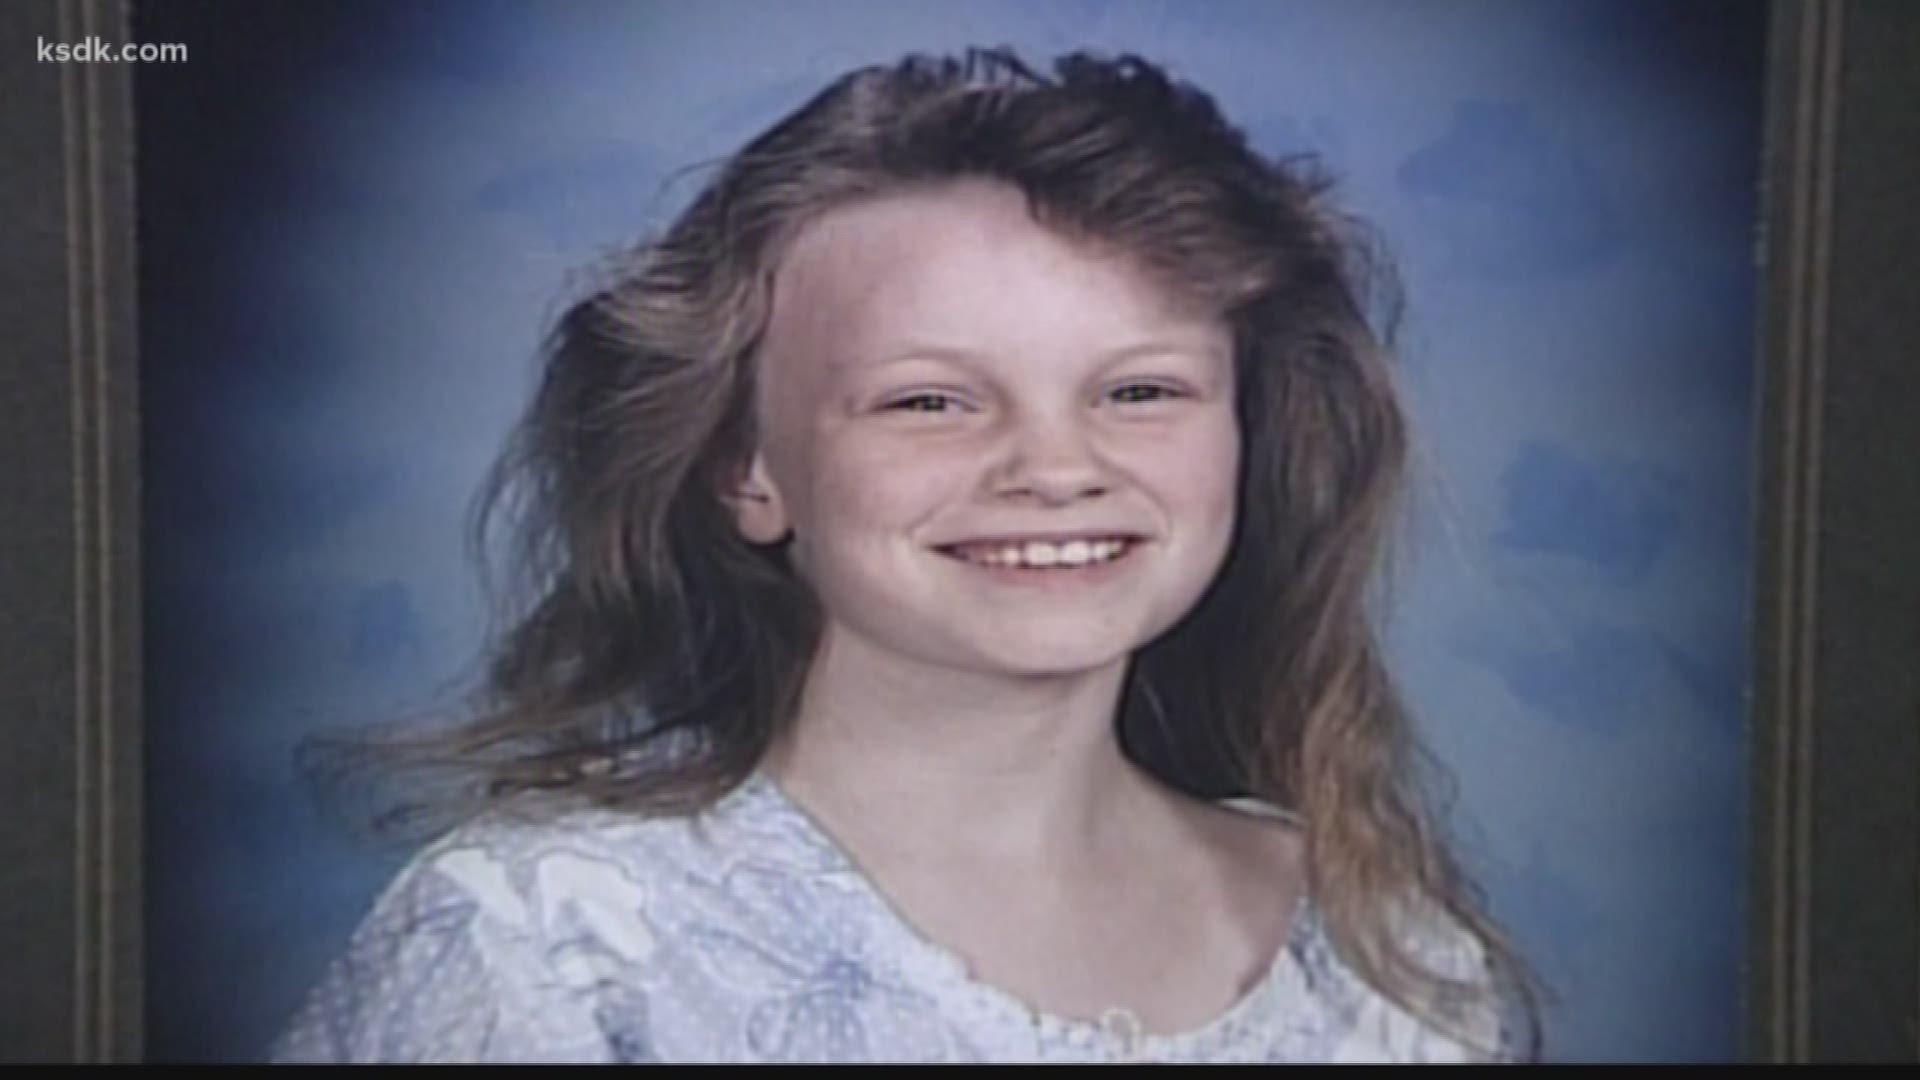 It's one of the most haunting unsolved murders in S. Louis history. Nine-year-old Angie Housman was kidnapped, tortured, starved, and left to die. Investigators are still searching for Angie’s killer, but there is a new person of interest in the investigation.